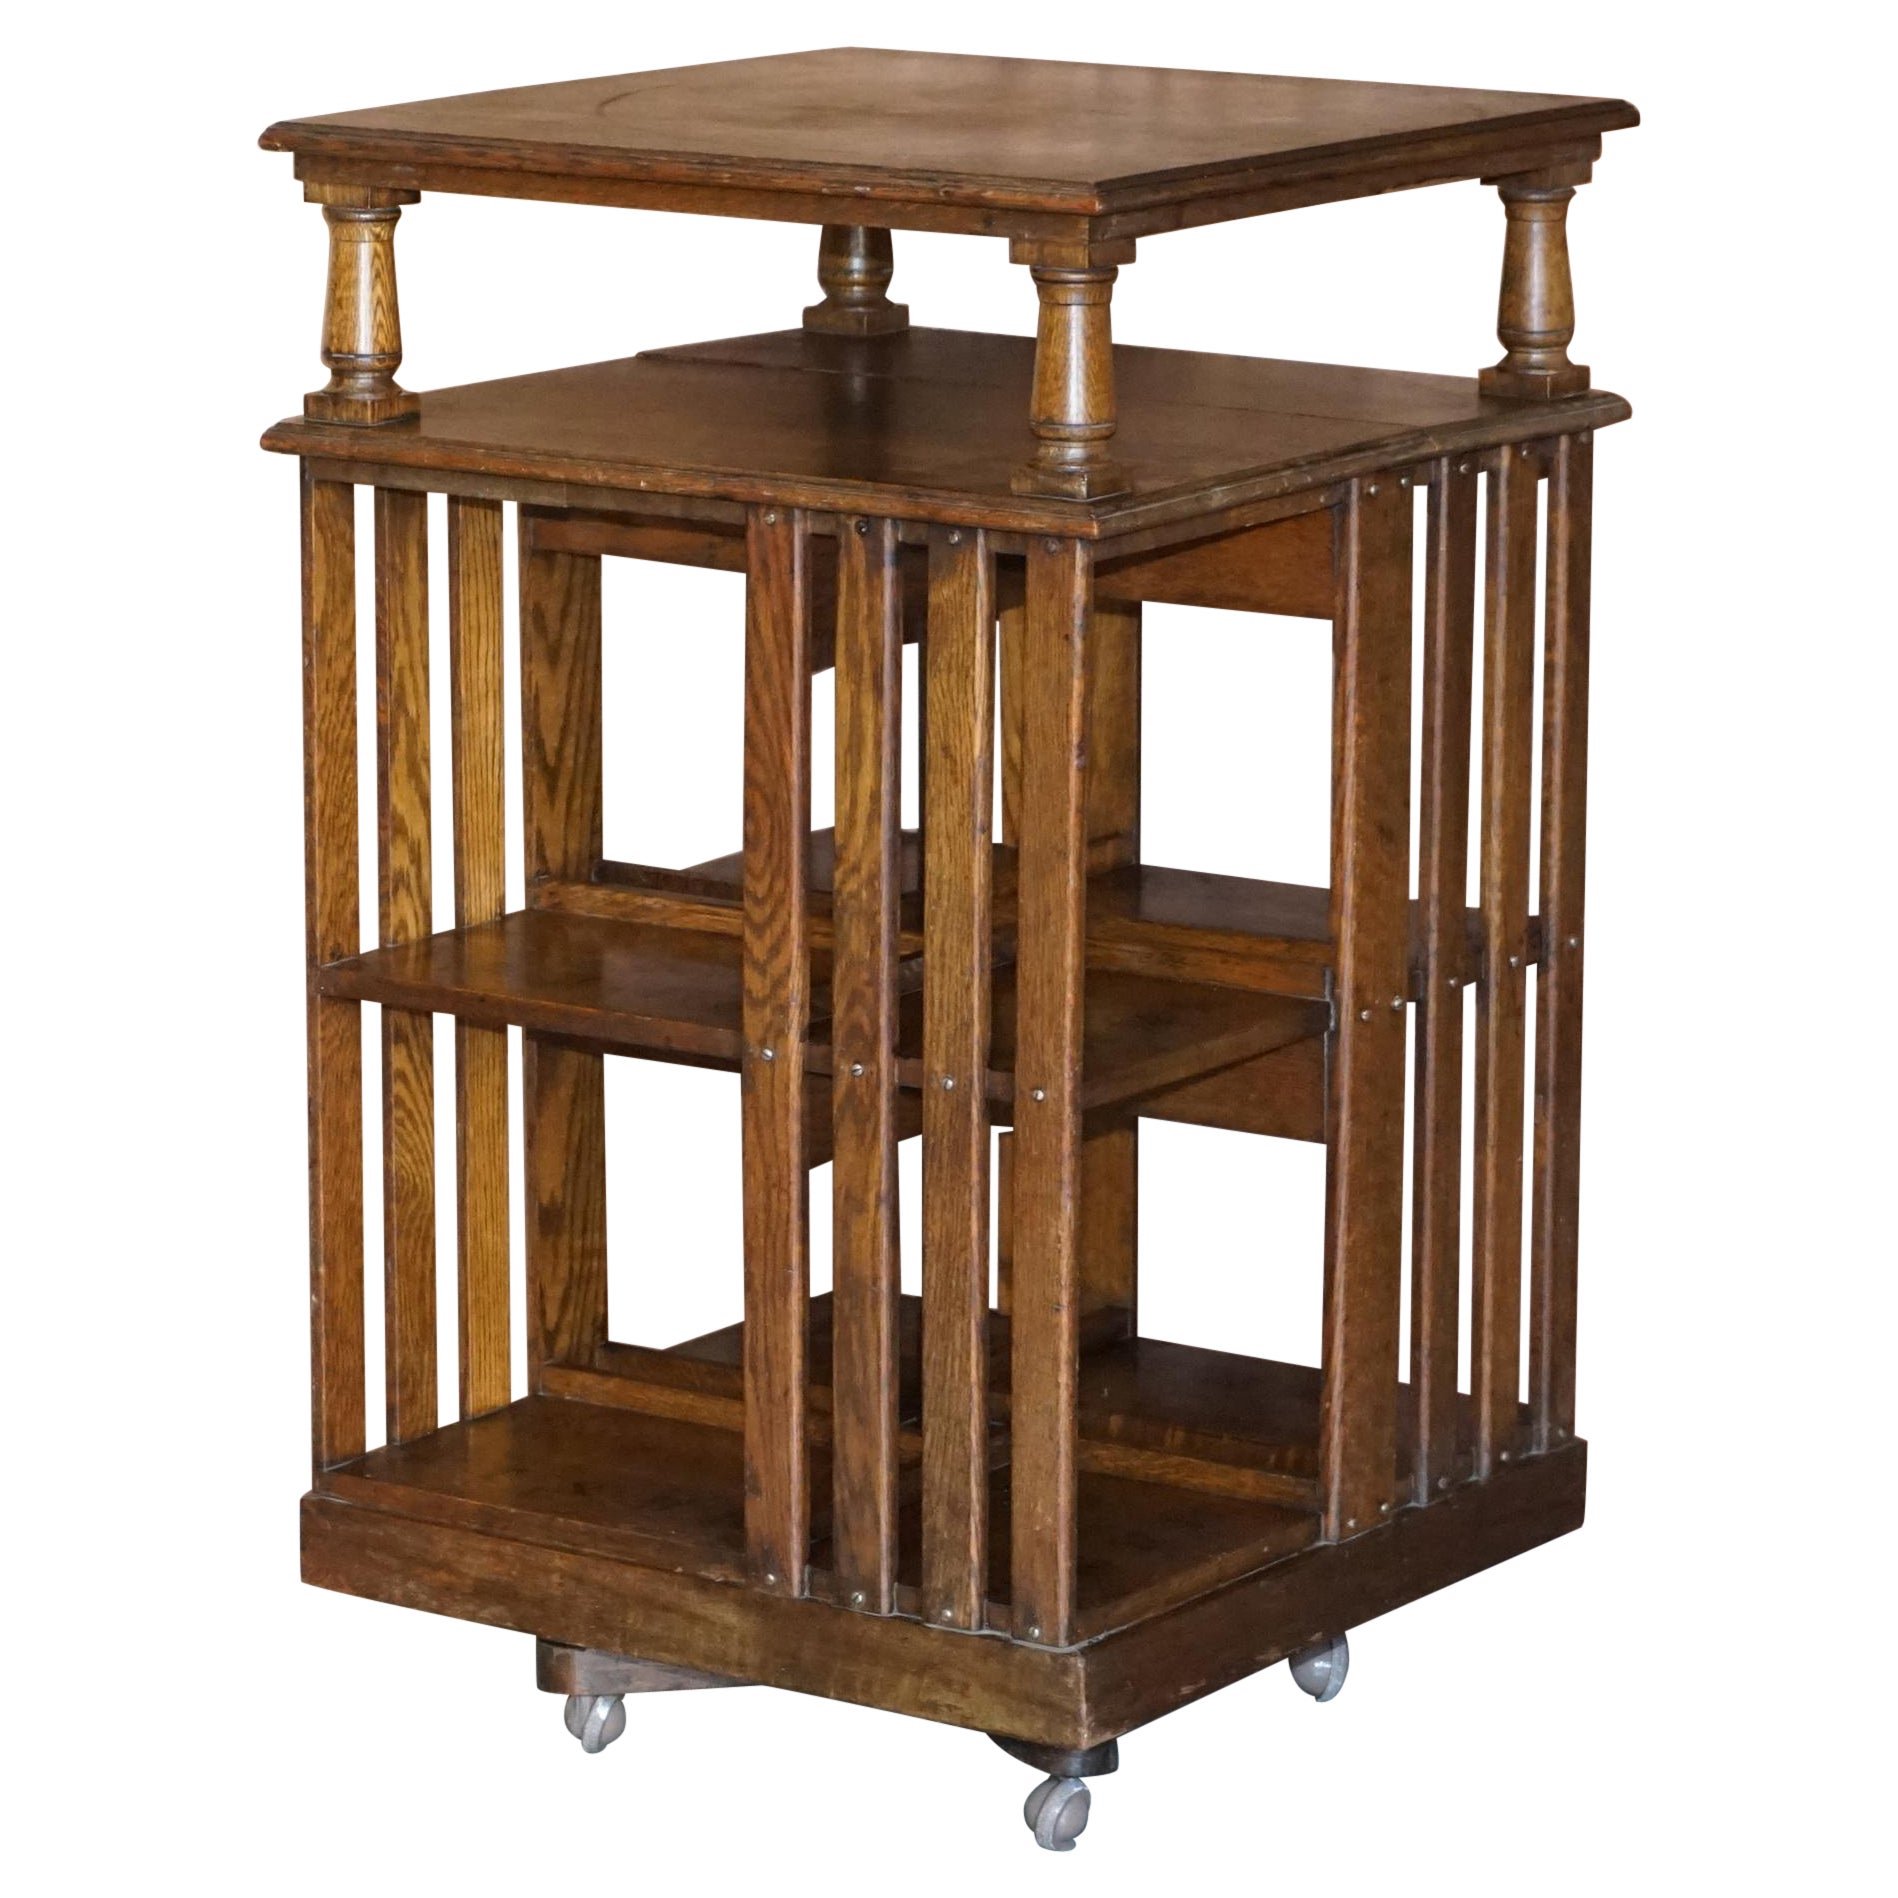 Very Large circa 1880 Antique Victorian English Oak Revolving Bookcase Table For Sale